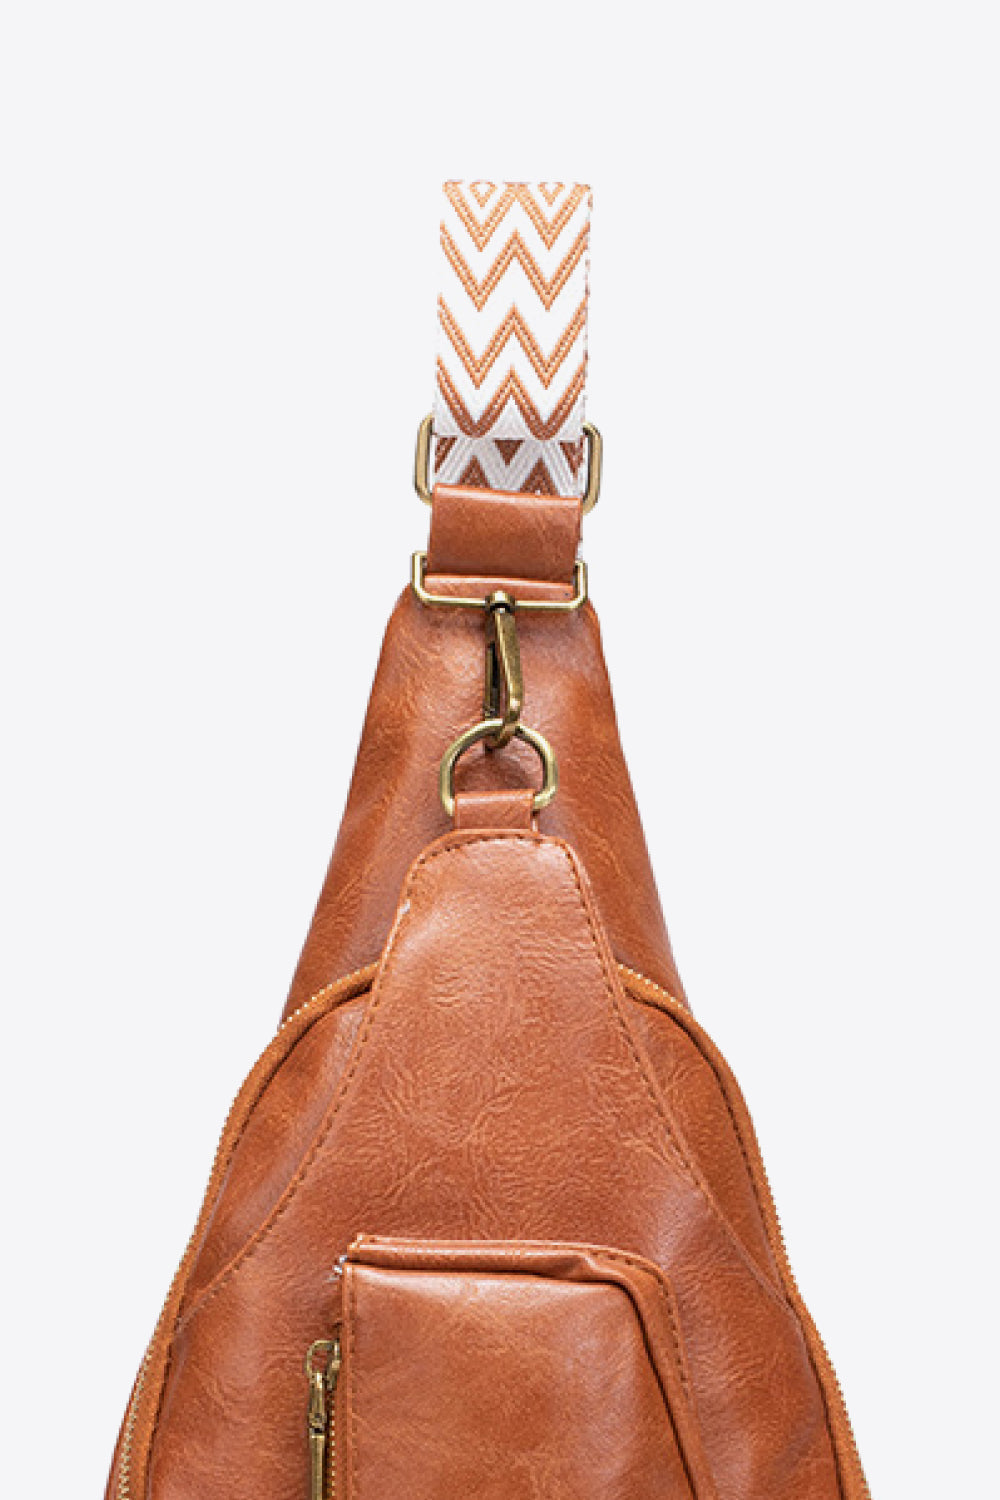 BROWN ONE SIZE - All The Feels PU Leather Sling Bag - handbag at TFC&H Co.